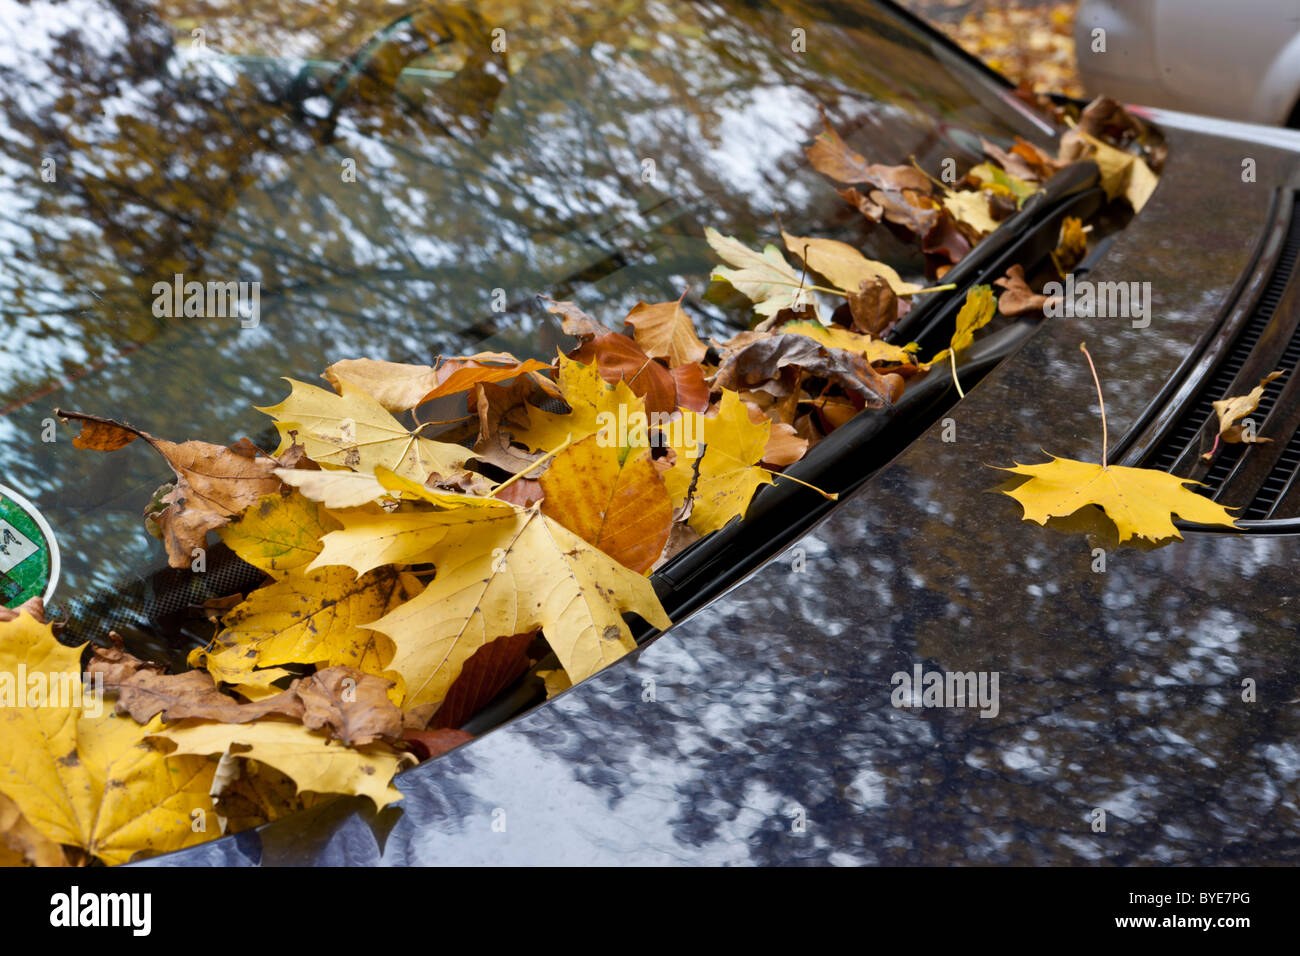 Autumn leaves behind the window wipers of a vehicle Stock Photo